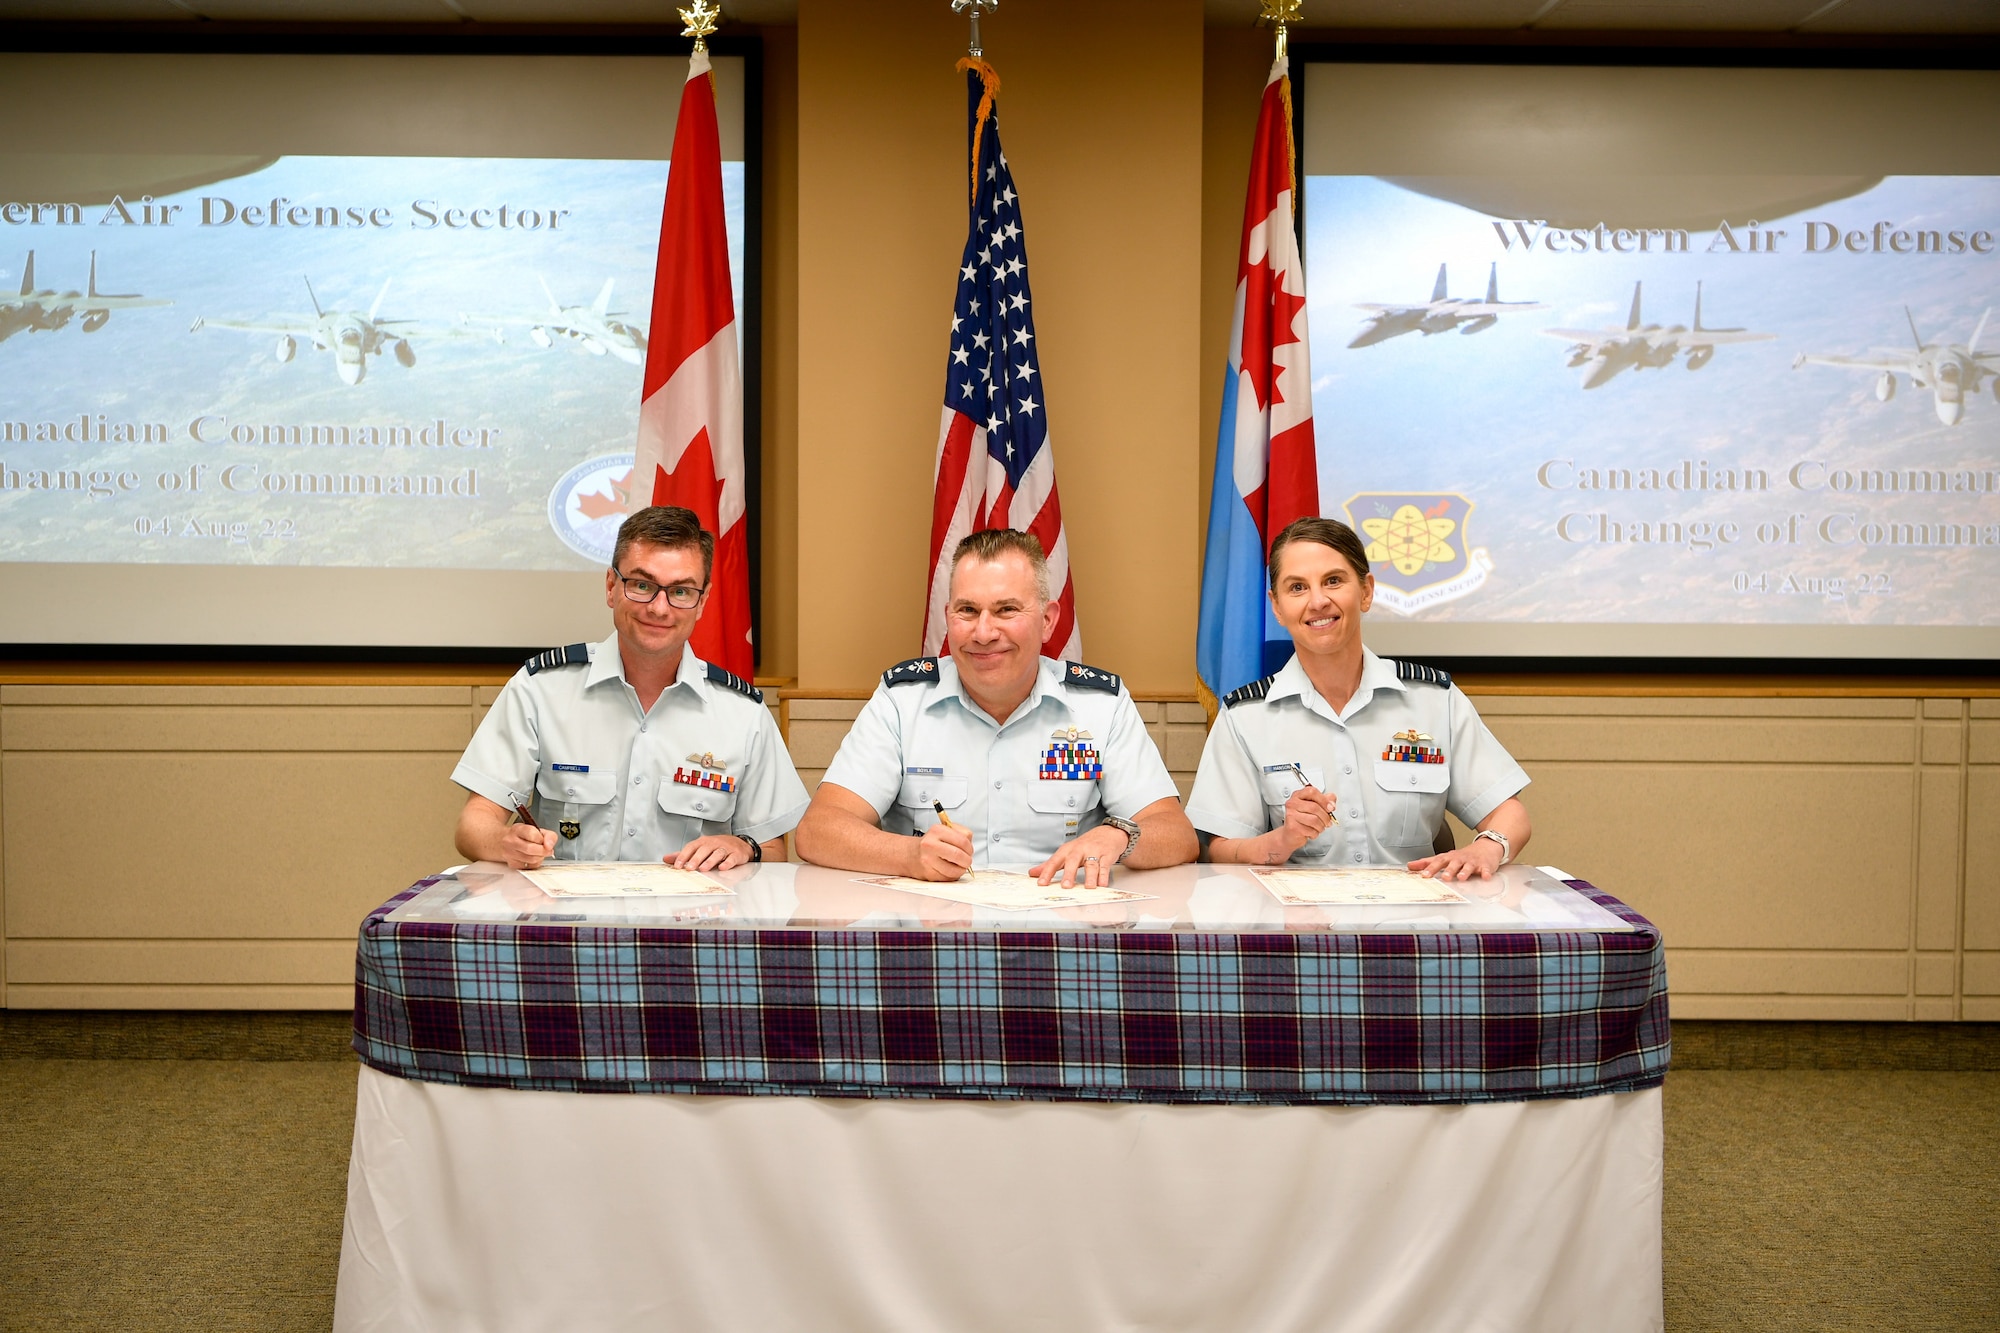 change of command scroll signing